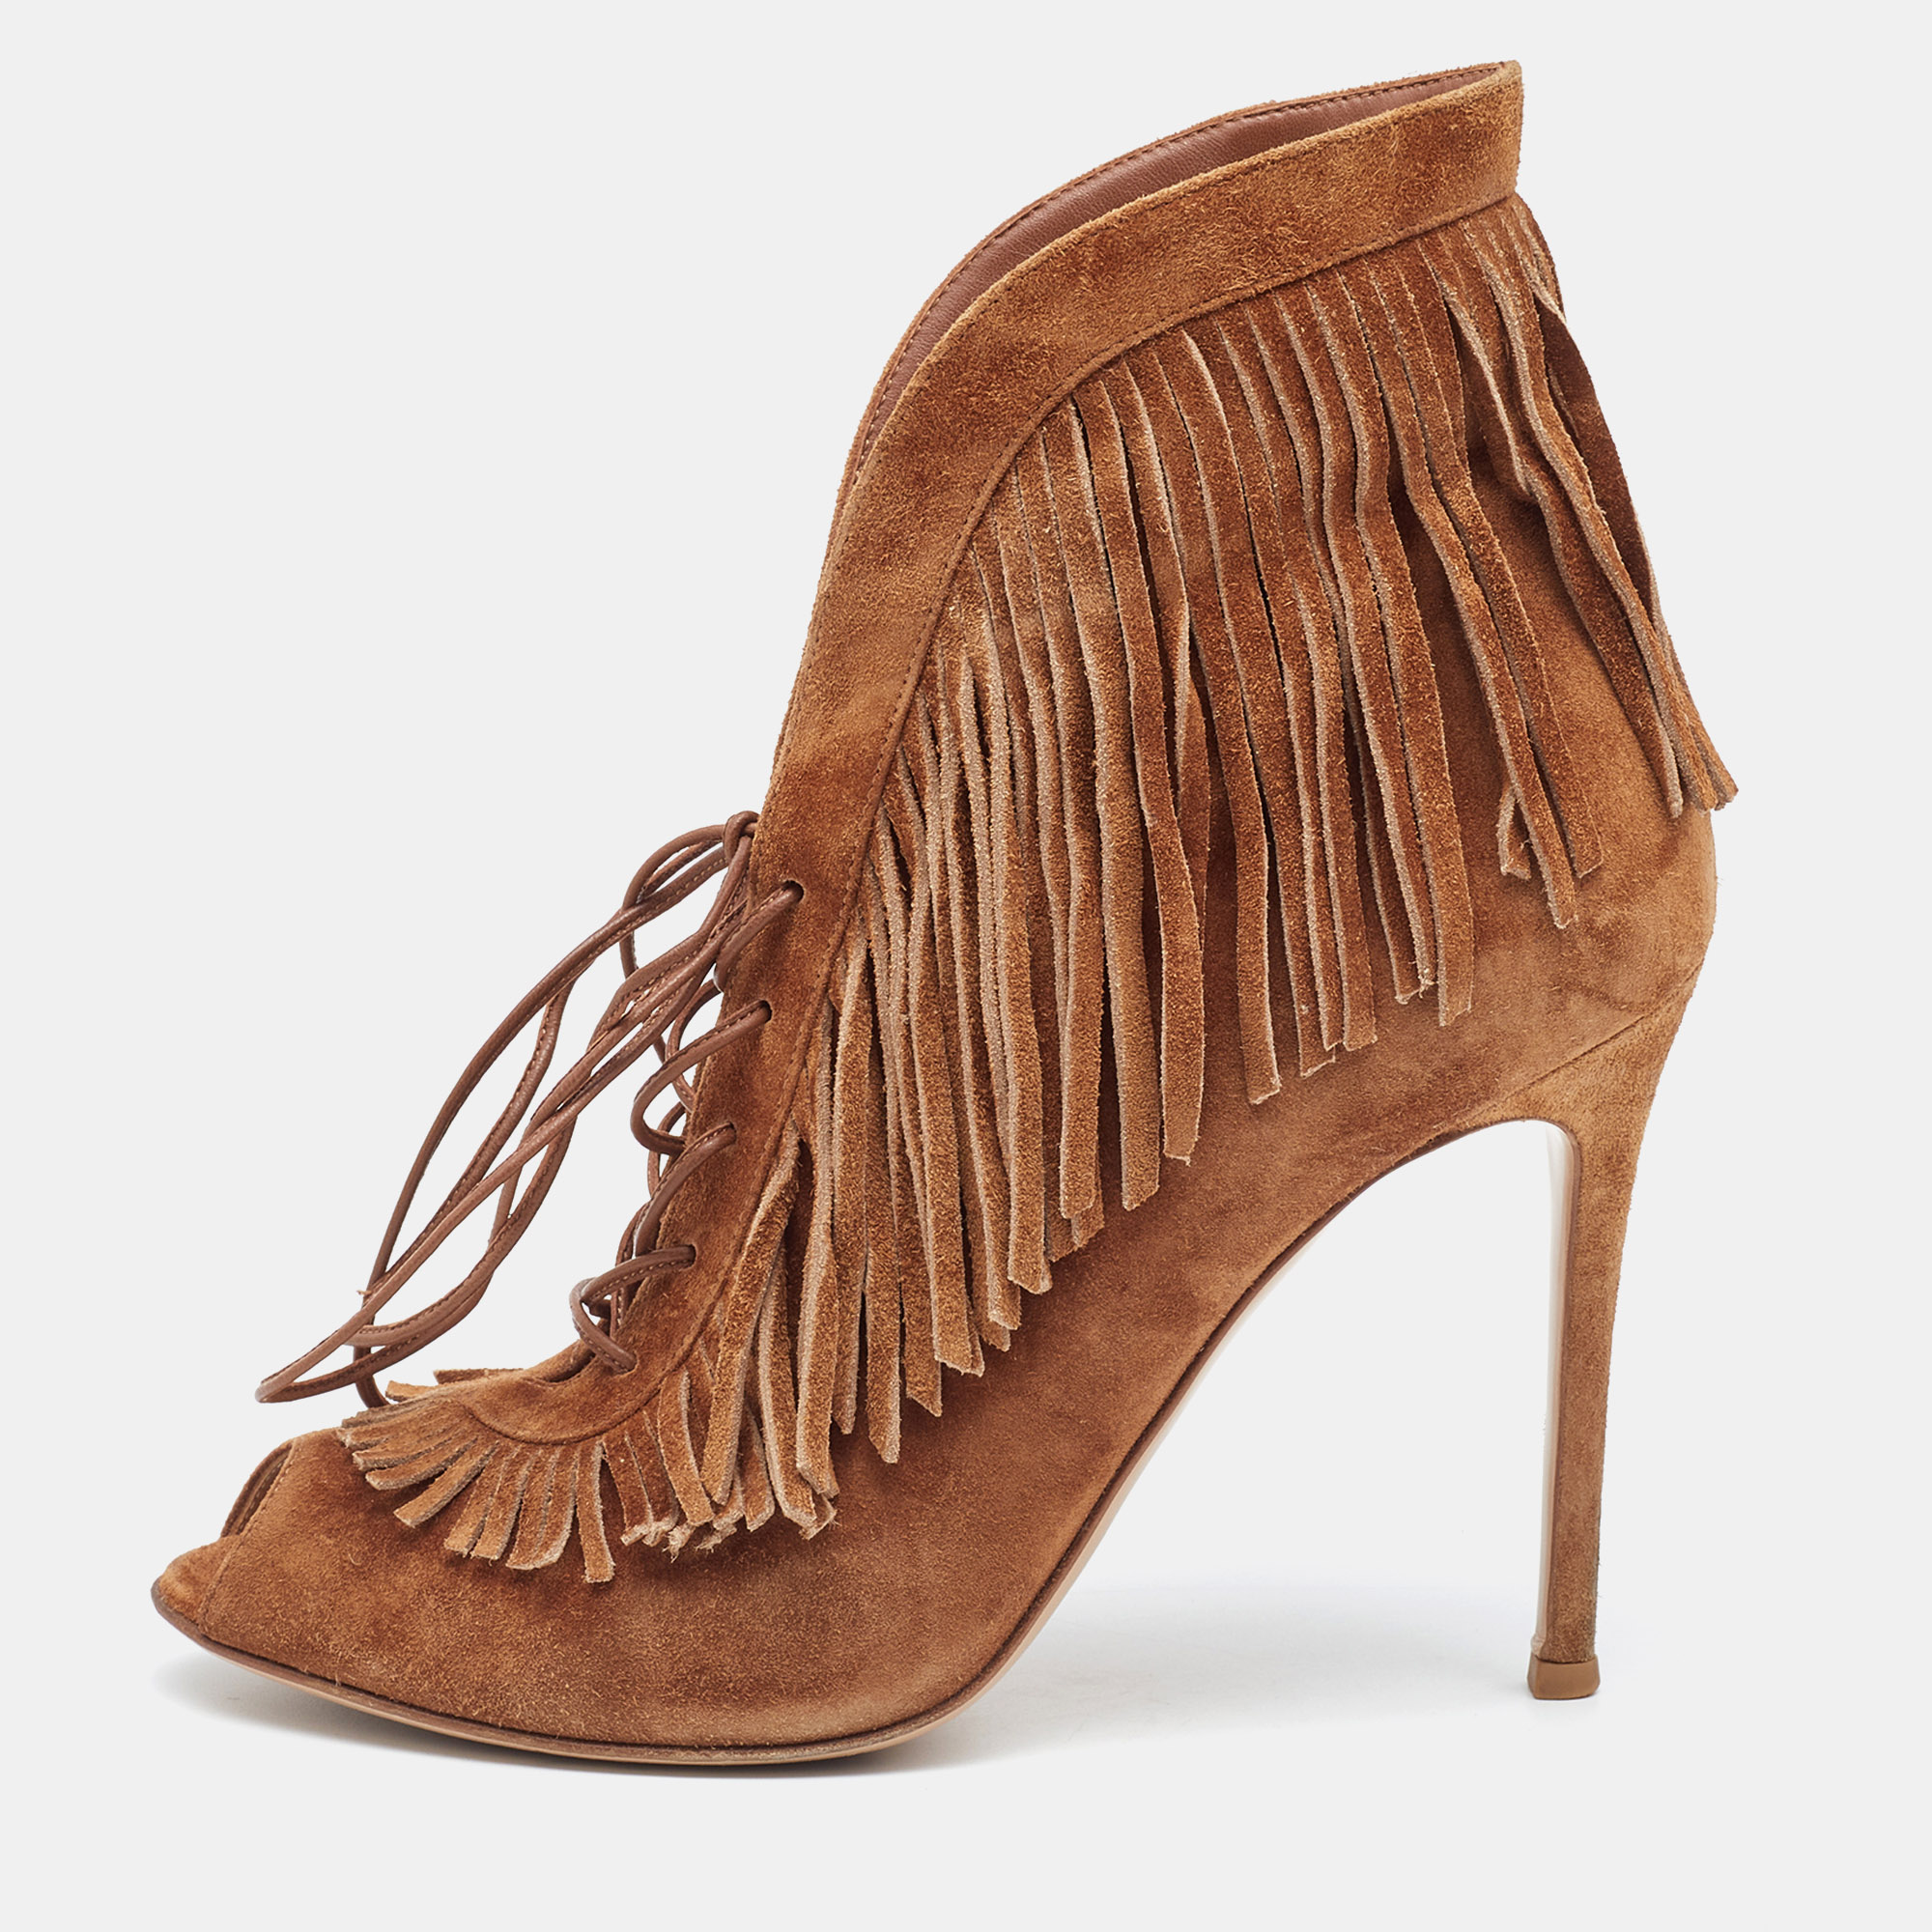 Pre-owned Gianvito Rossi Tan Suede Fringe Lace Up Ankle Booties Size 39